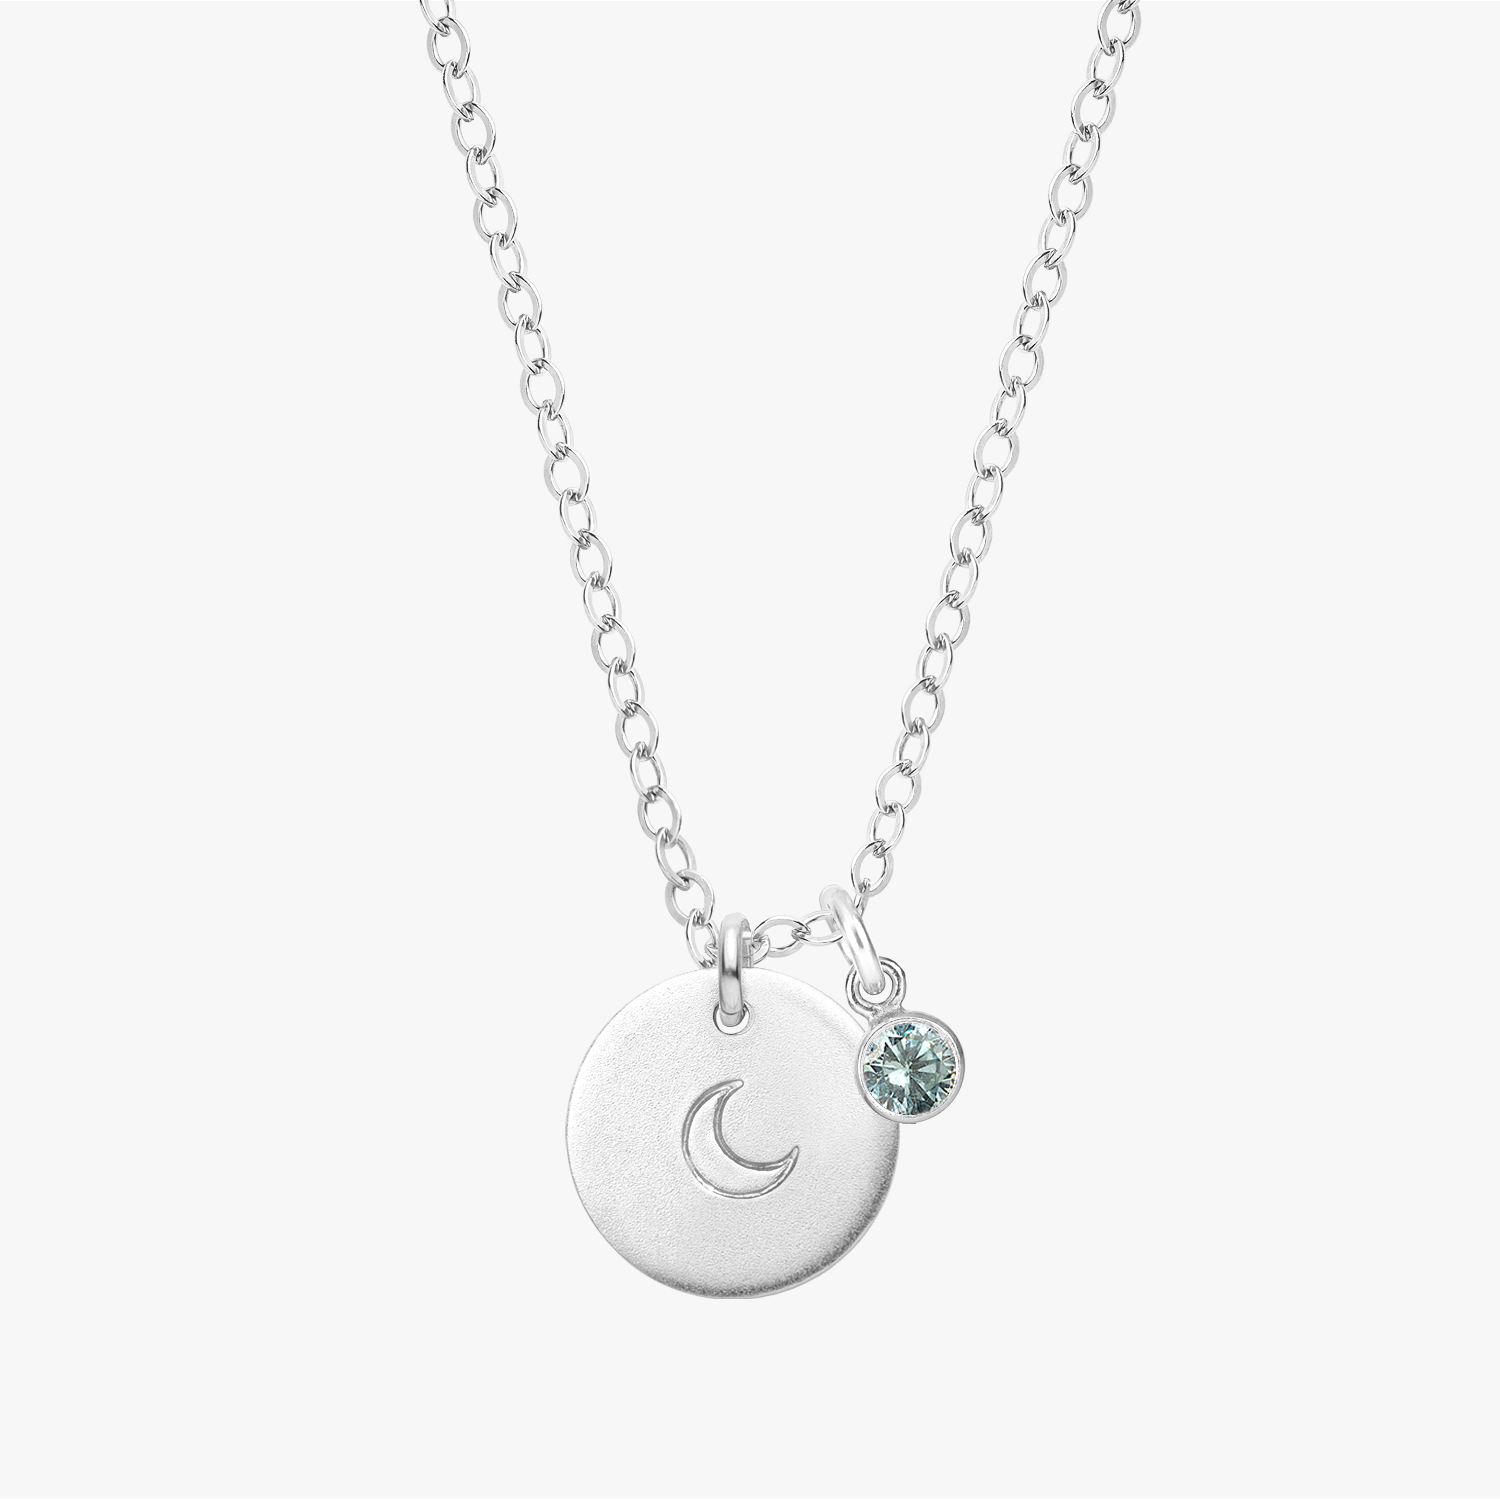 Personalized Celestial Silver Necklace